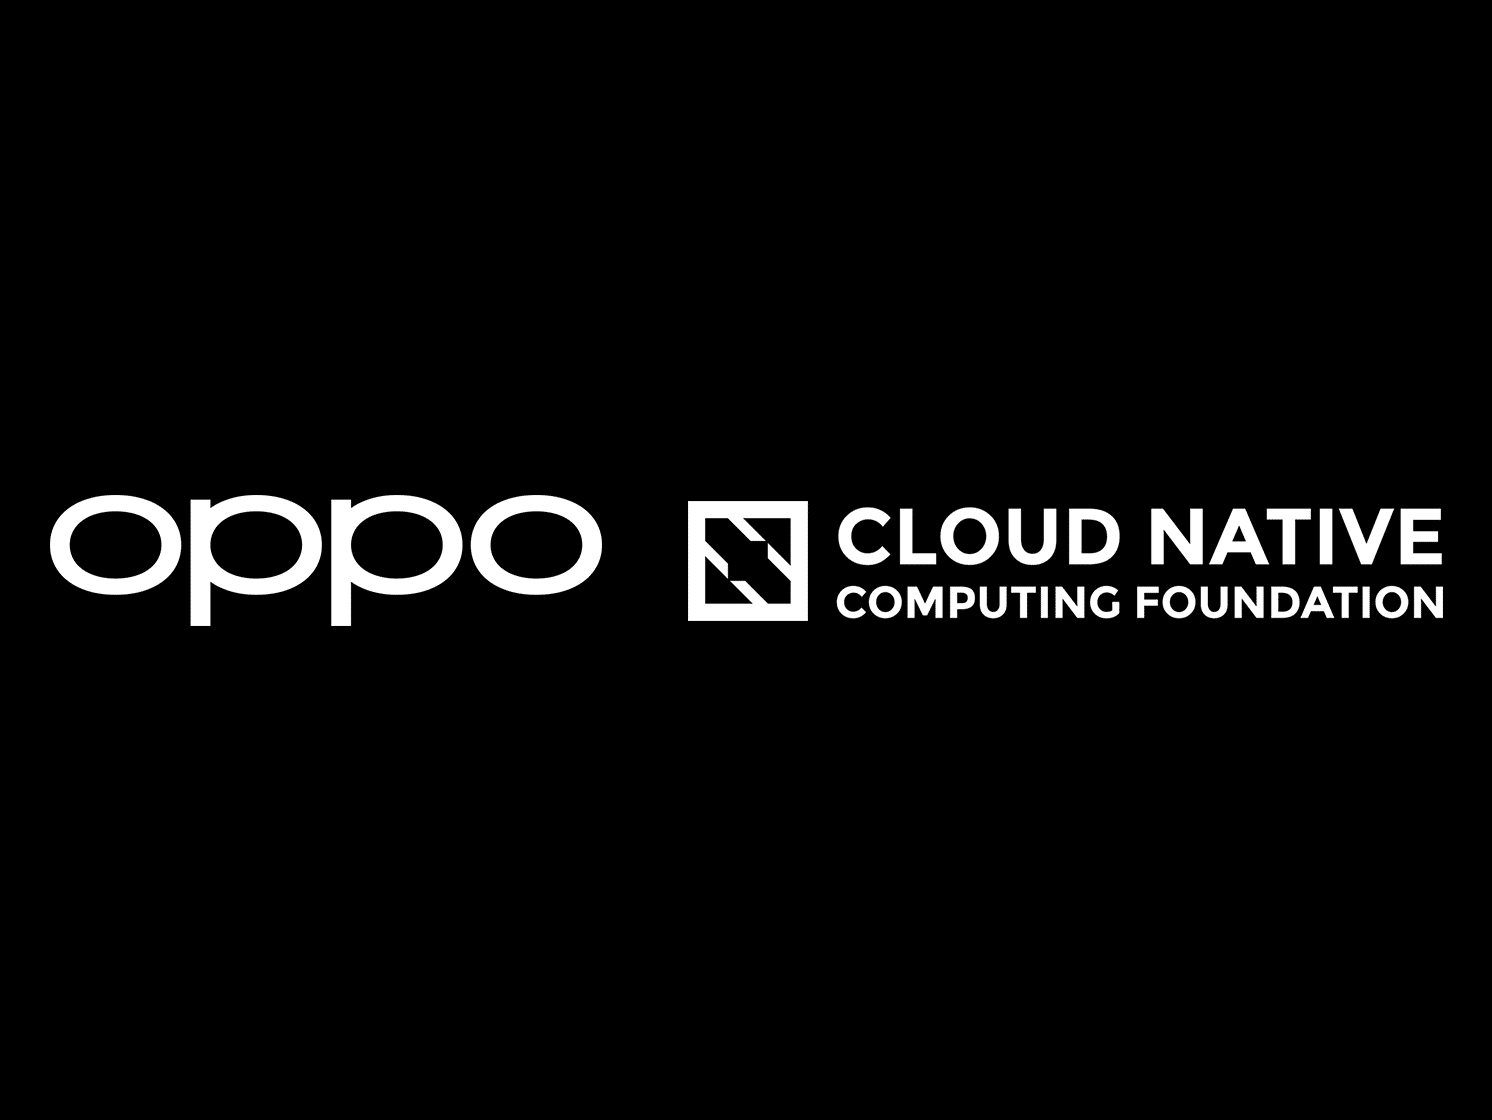 OPPO annuncia il suo ingresso in Cloud Native Computing Foundation - CNCF thumbnail